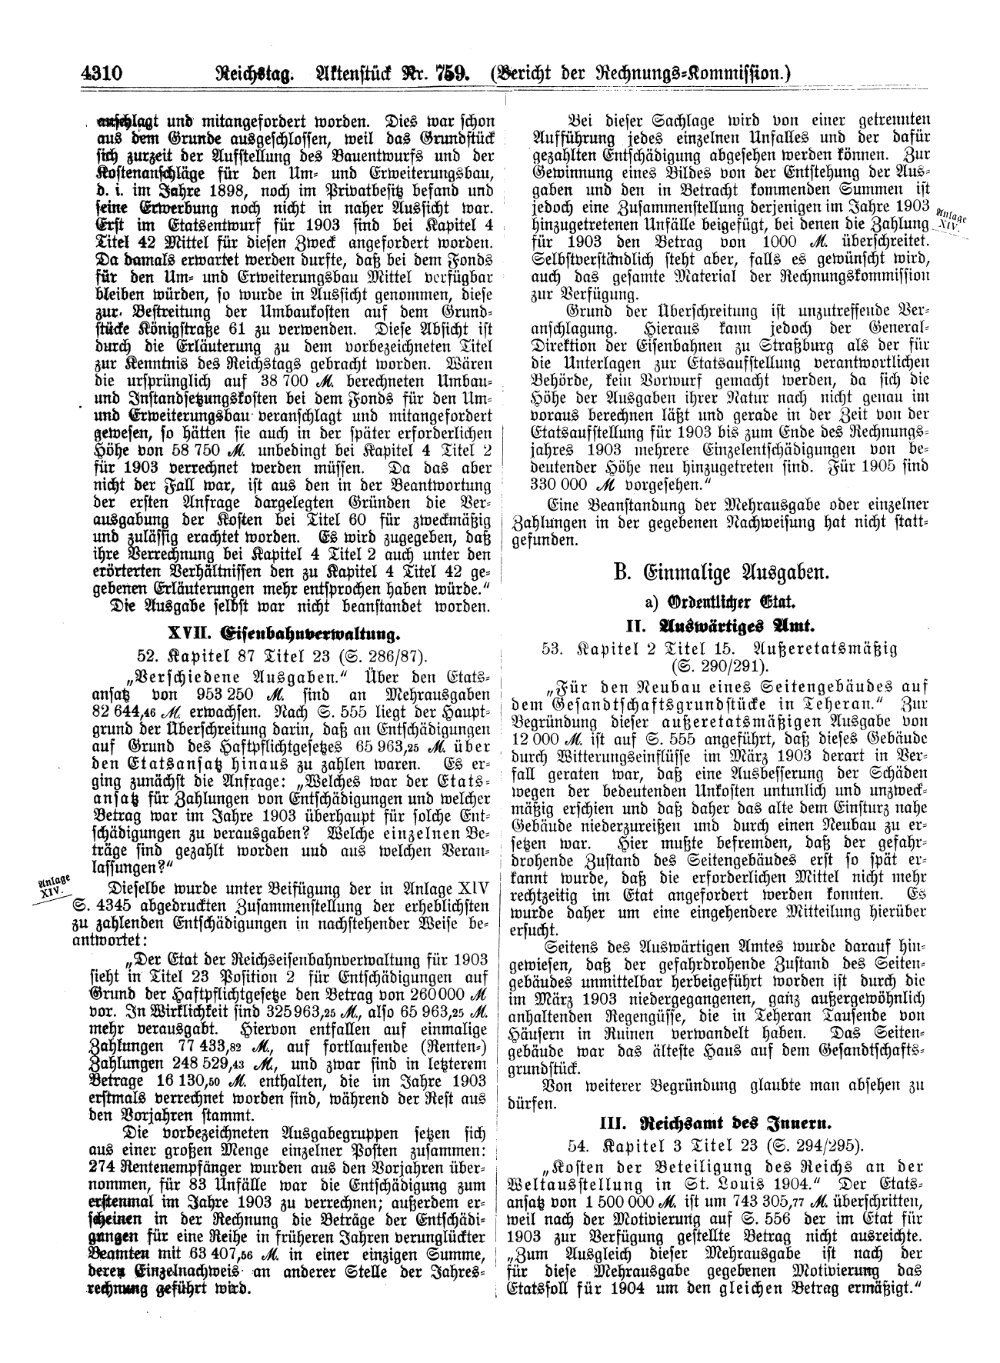 Scan of page 4310